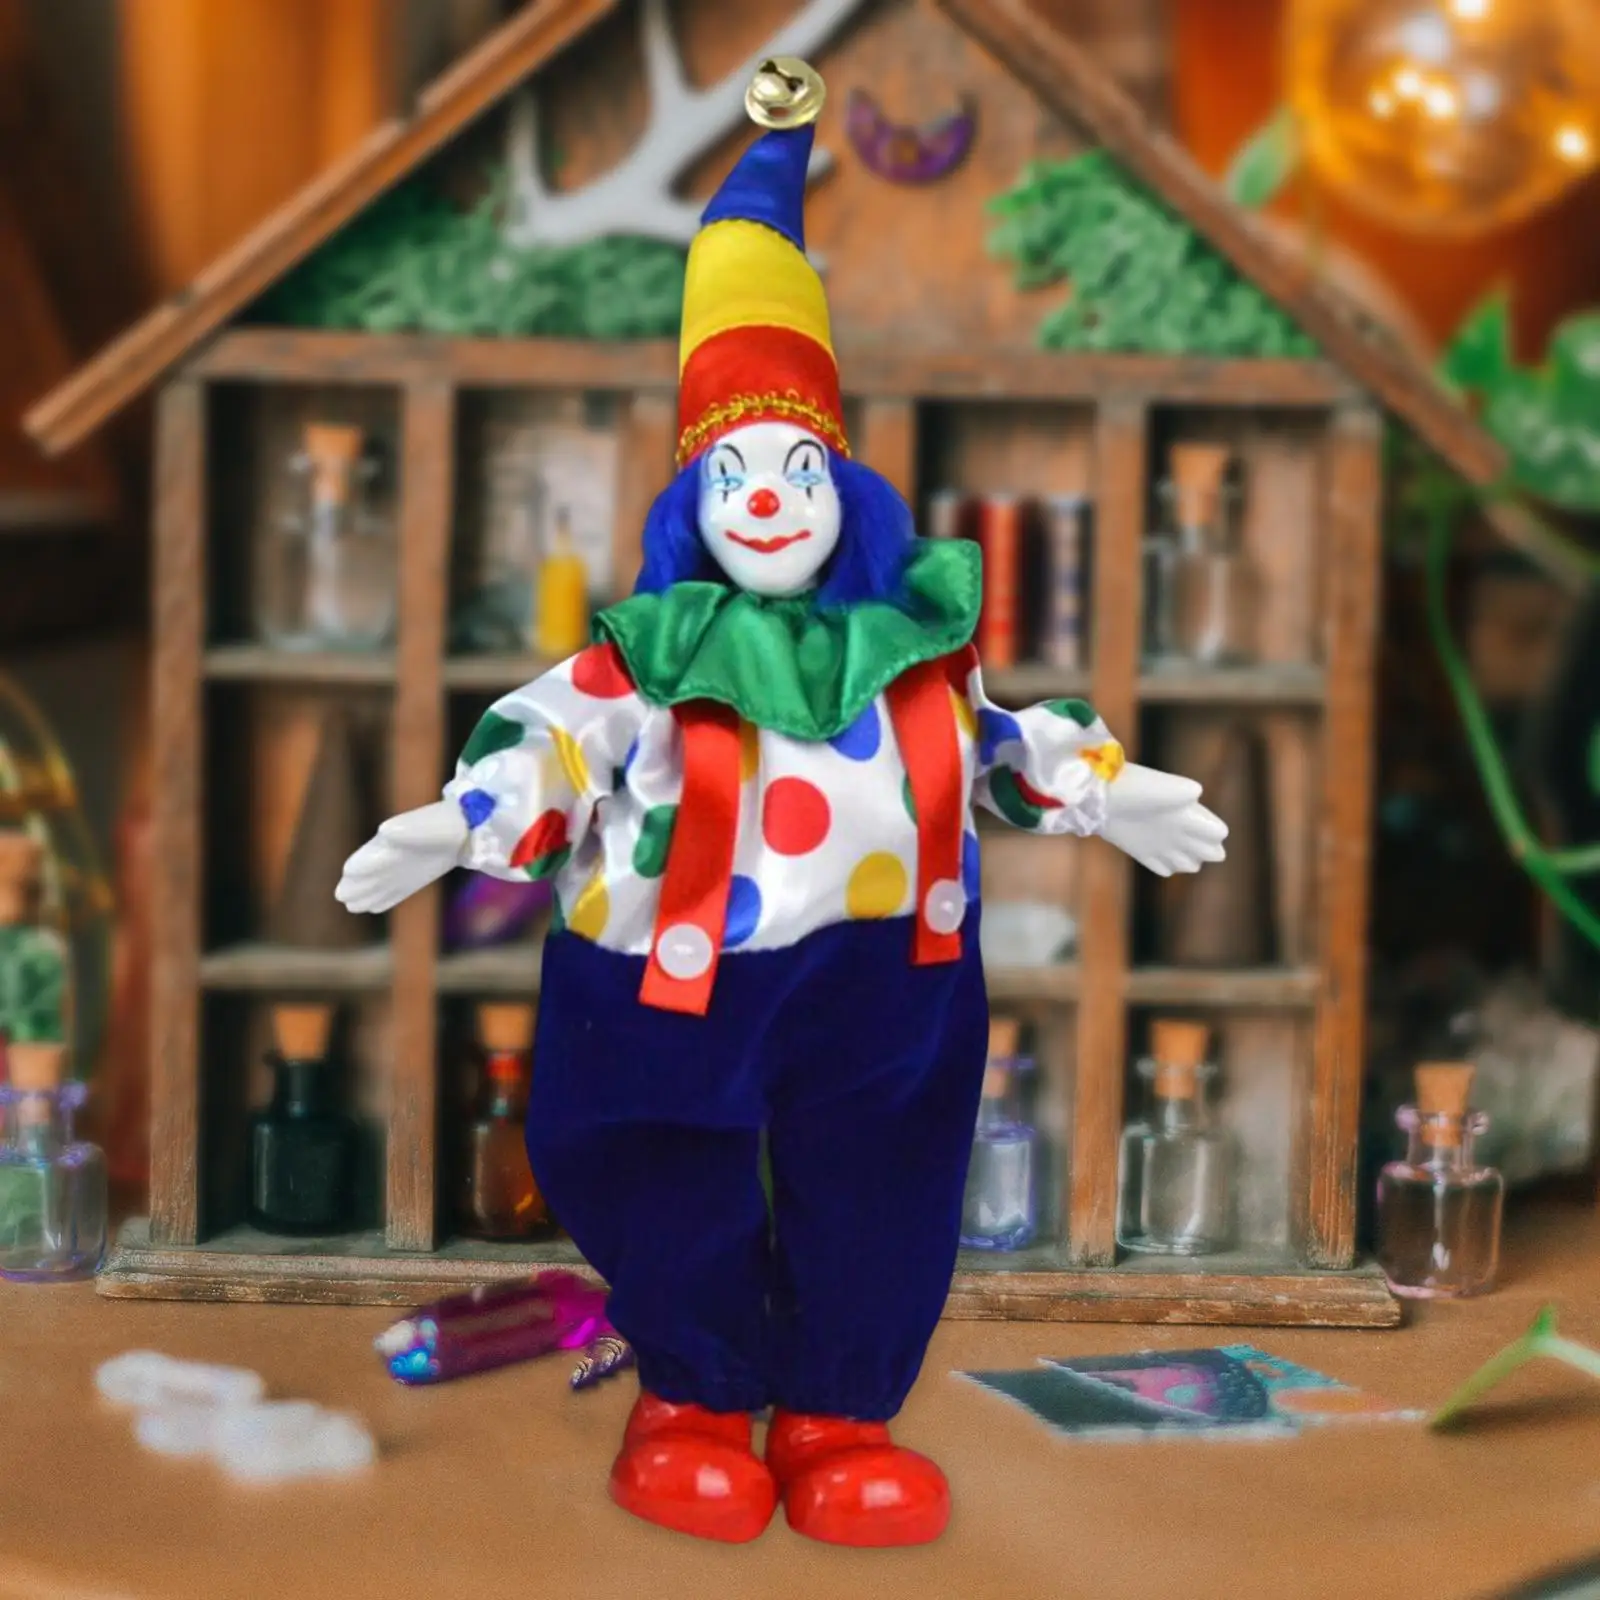 Cute Clown Figurines Doll with Costume Arts Home Decoration Delicate Can Sit & Stand for Table Decors Party Favors Collections